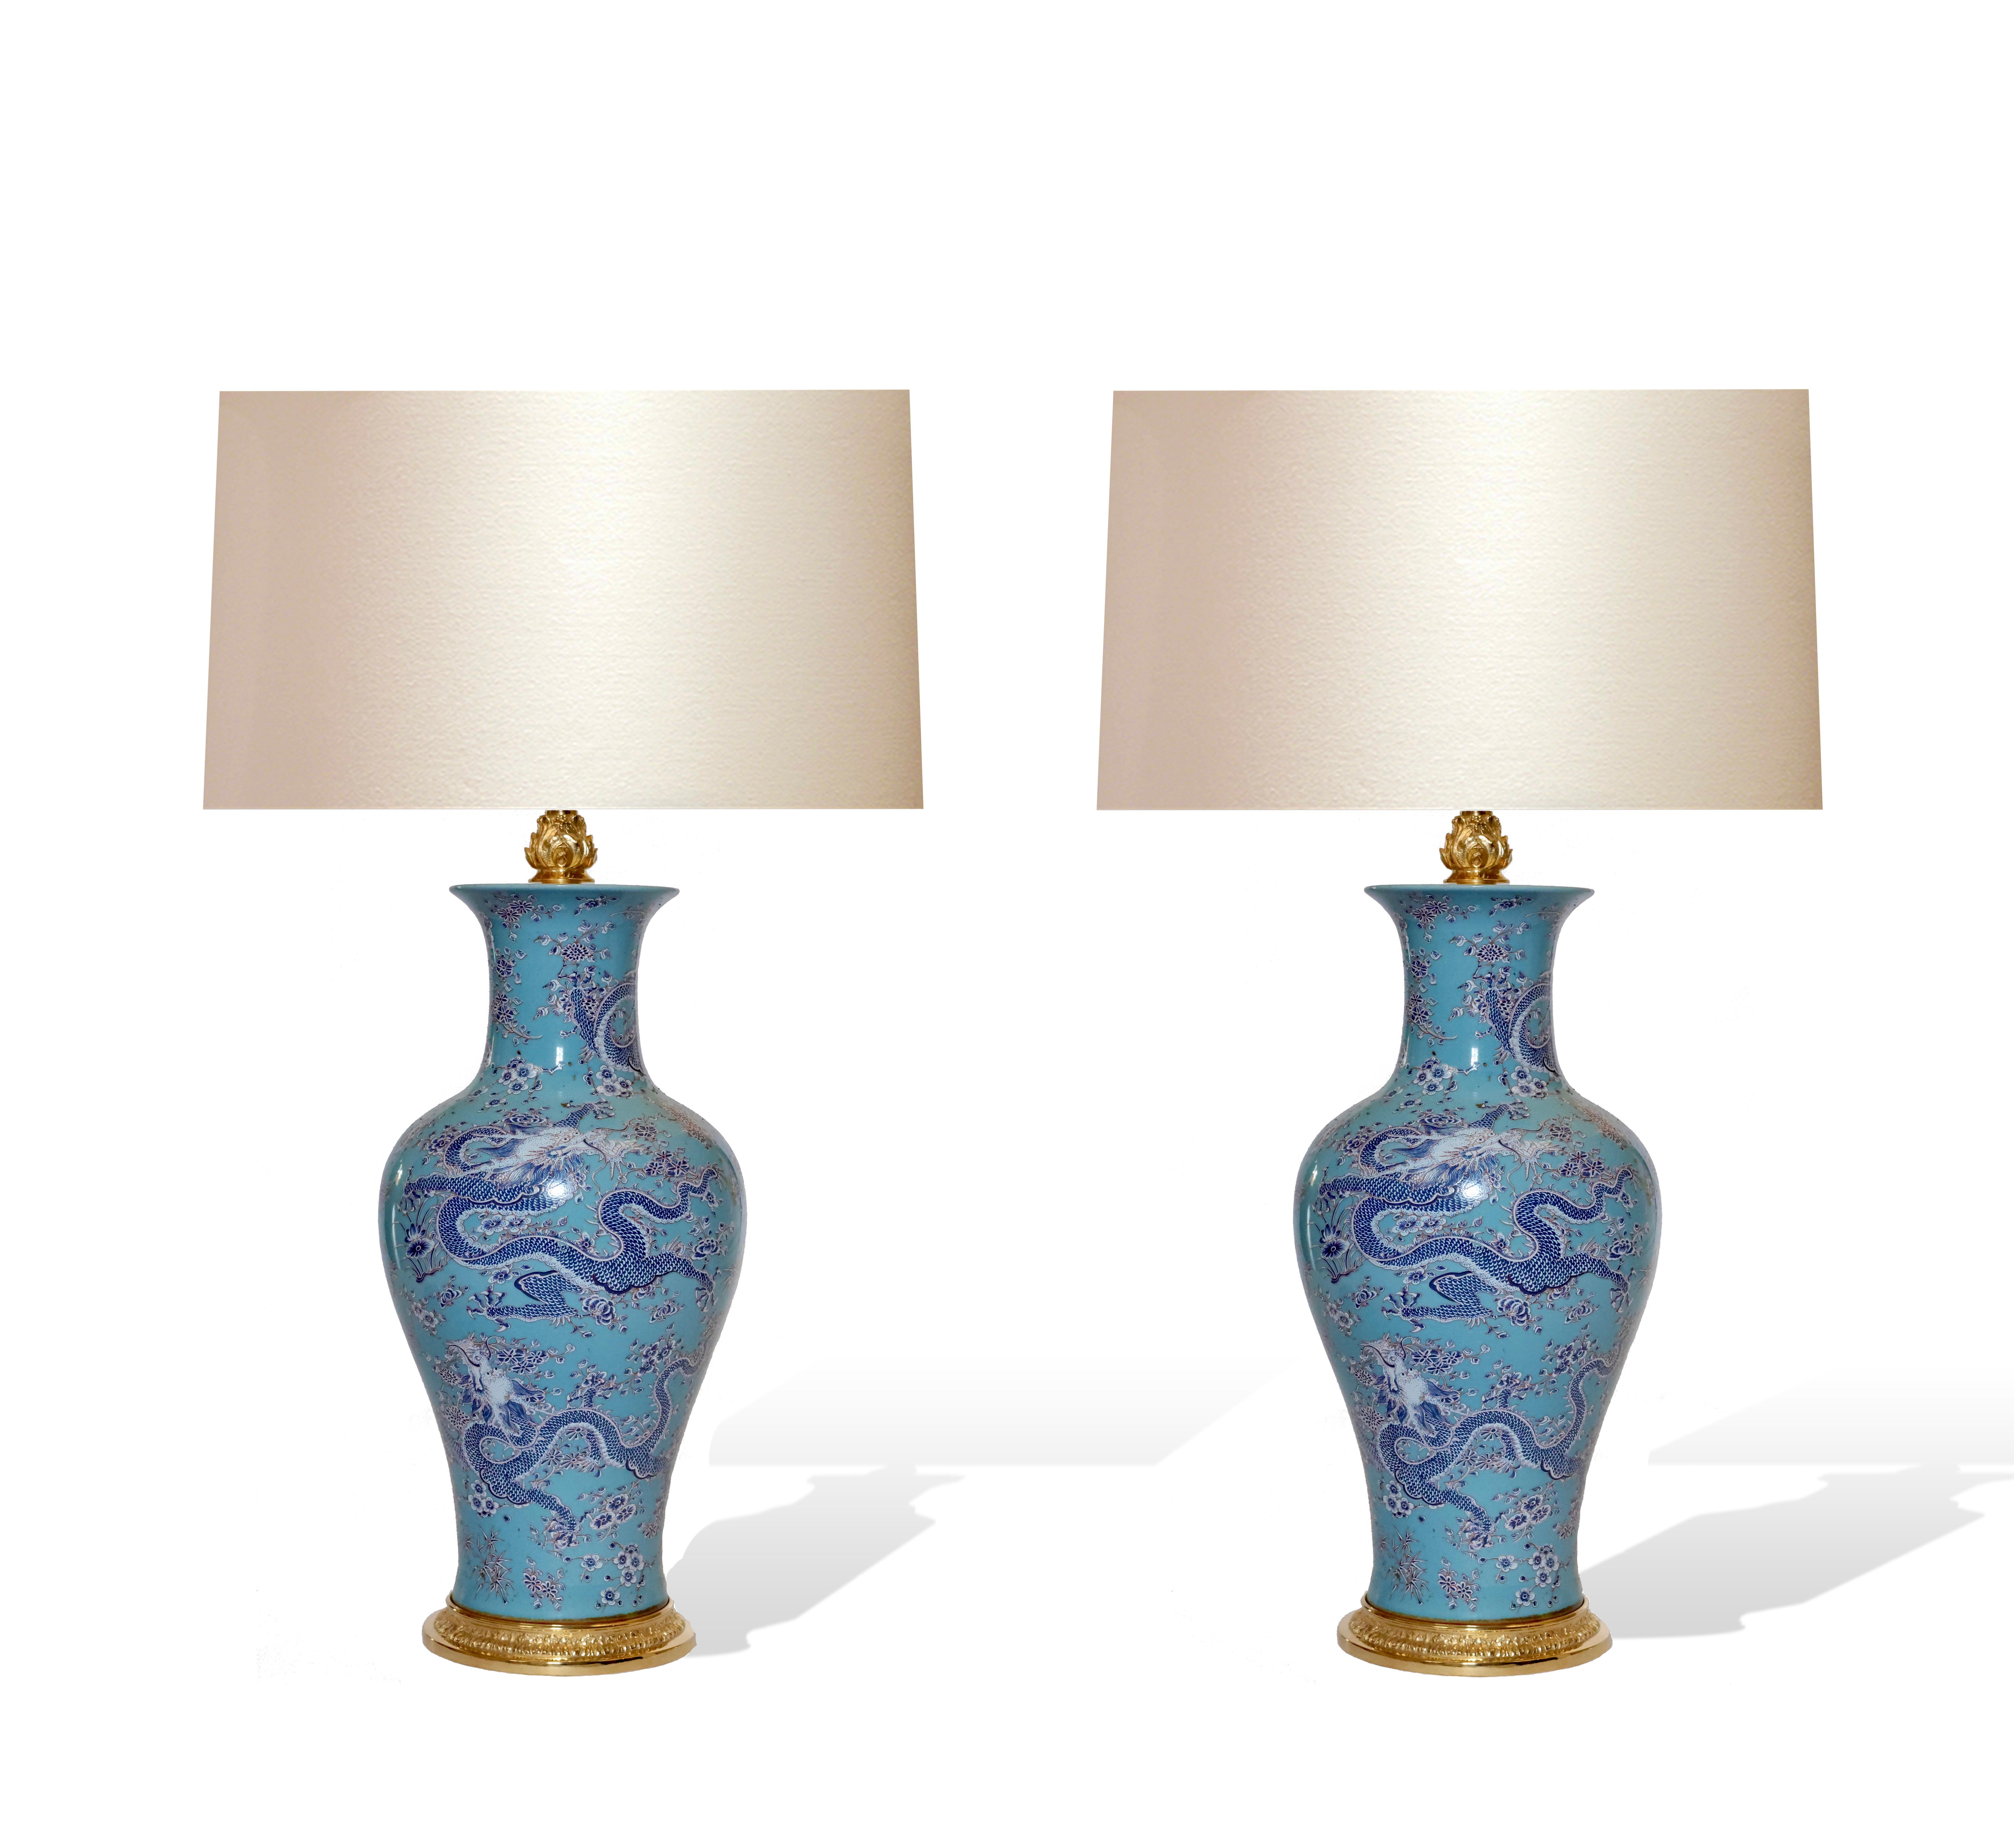 Pair of blue ground porcelain lamps with dragons decoration.
To the top of the blue porcelain,17 inches.
The lampshade is not included.